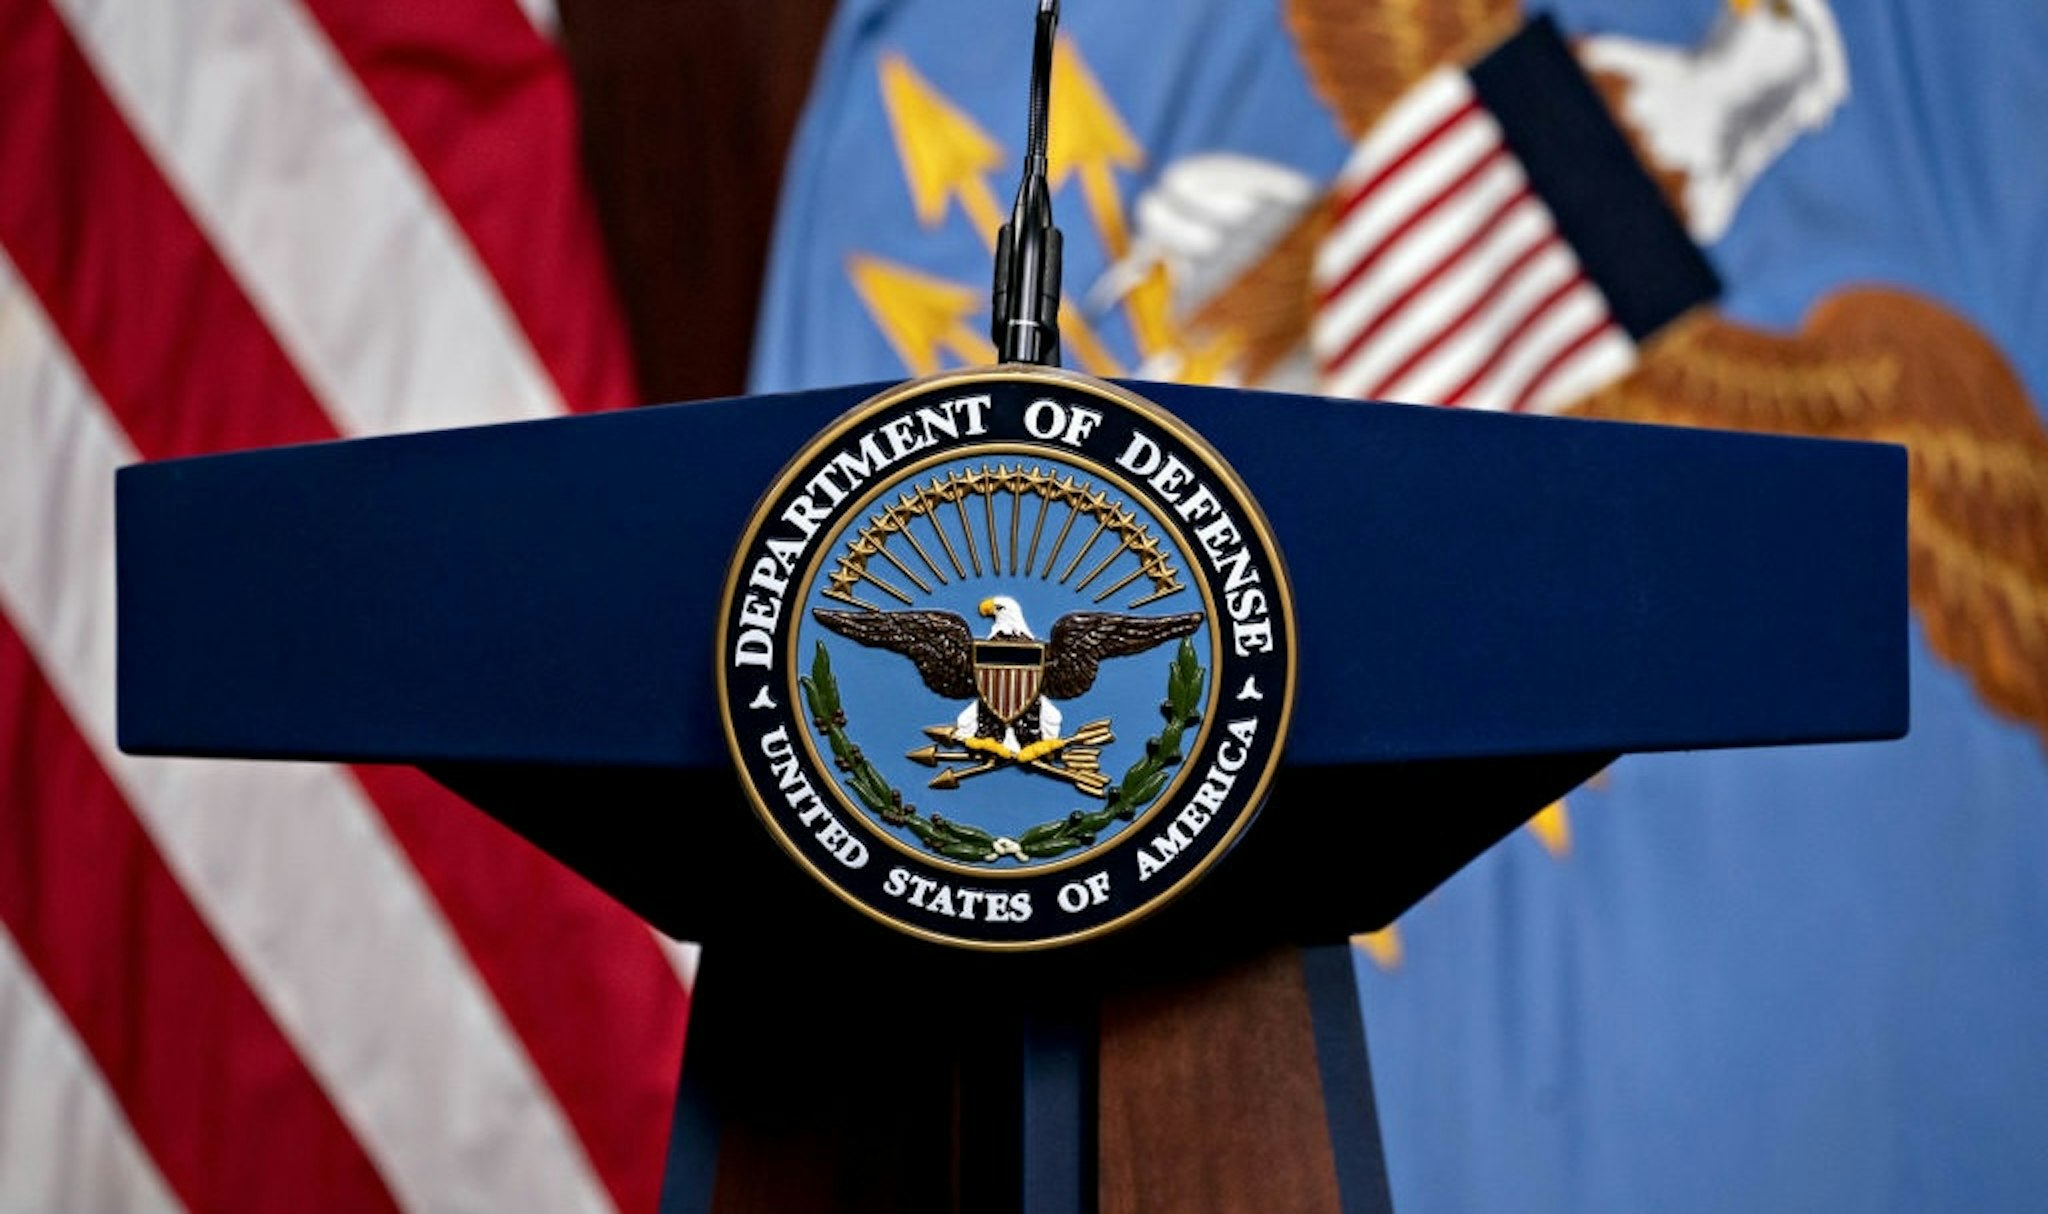 The U.S. Department of Defense (DOD) seal in the Pentagon Briefing Room in Arlington, Virginia., U.S., on Wednesday, Sept. 1, 2021. President Biden yesterday declared an end to two decades of U.S. military operations in Afghanistan, offering an impassioned defense of his withdrawal and rejecting criticism that it was mishandled. Photographer: Andrew Harrer/Bloomberg